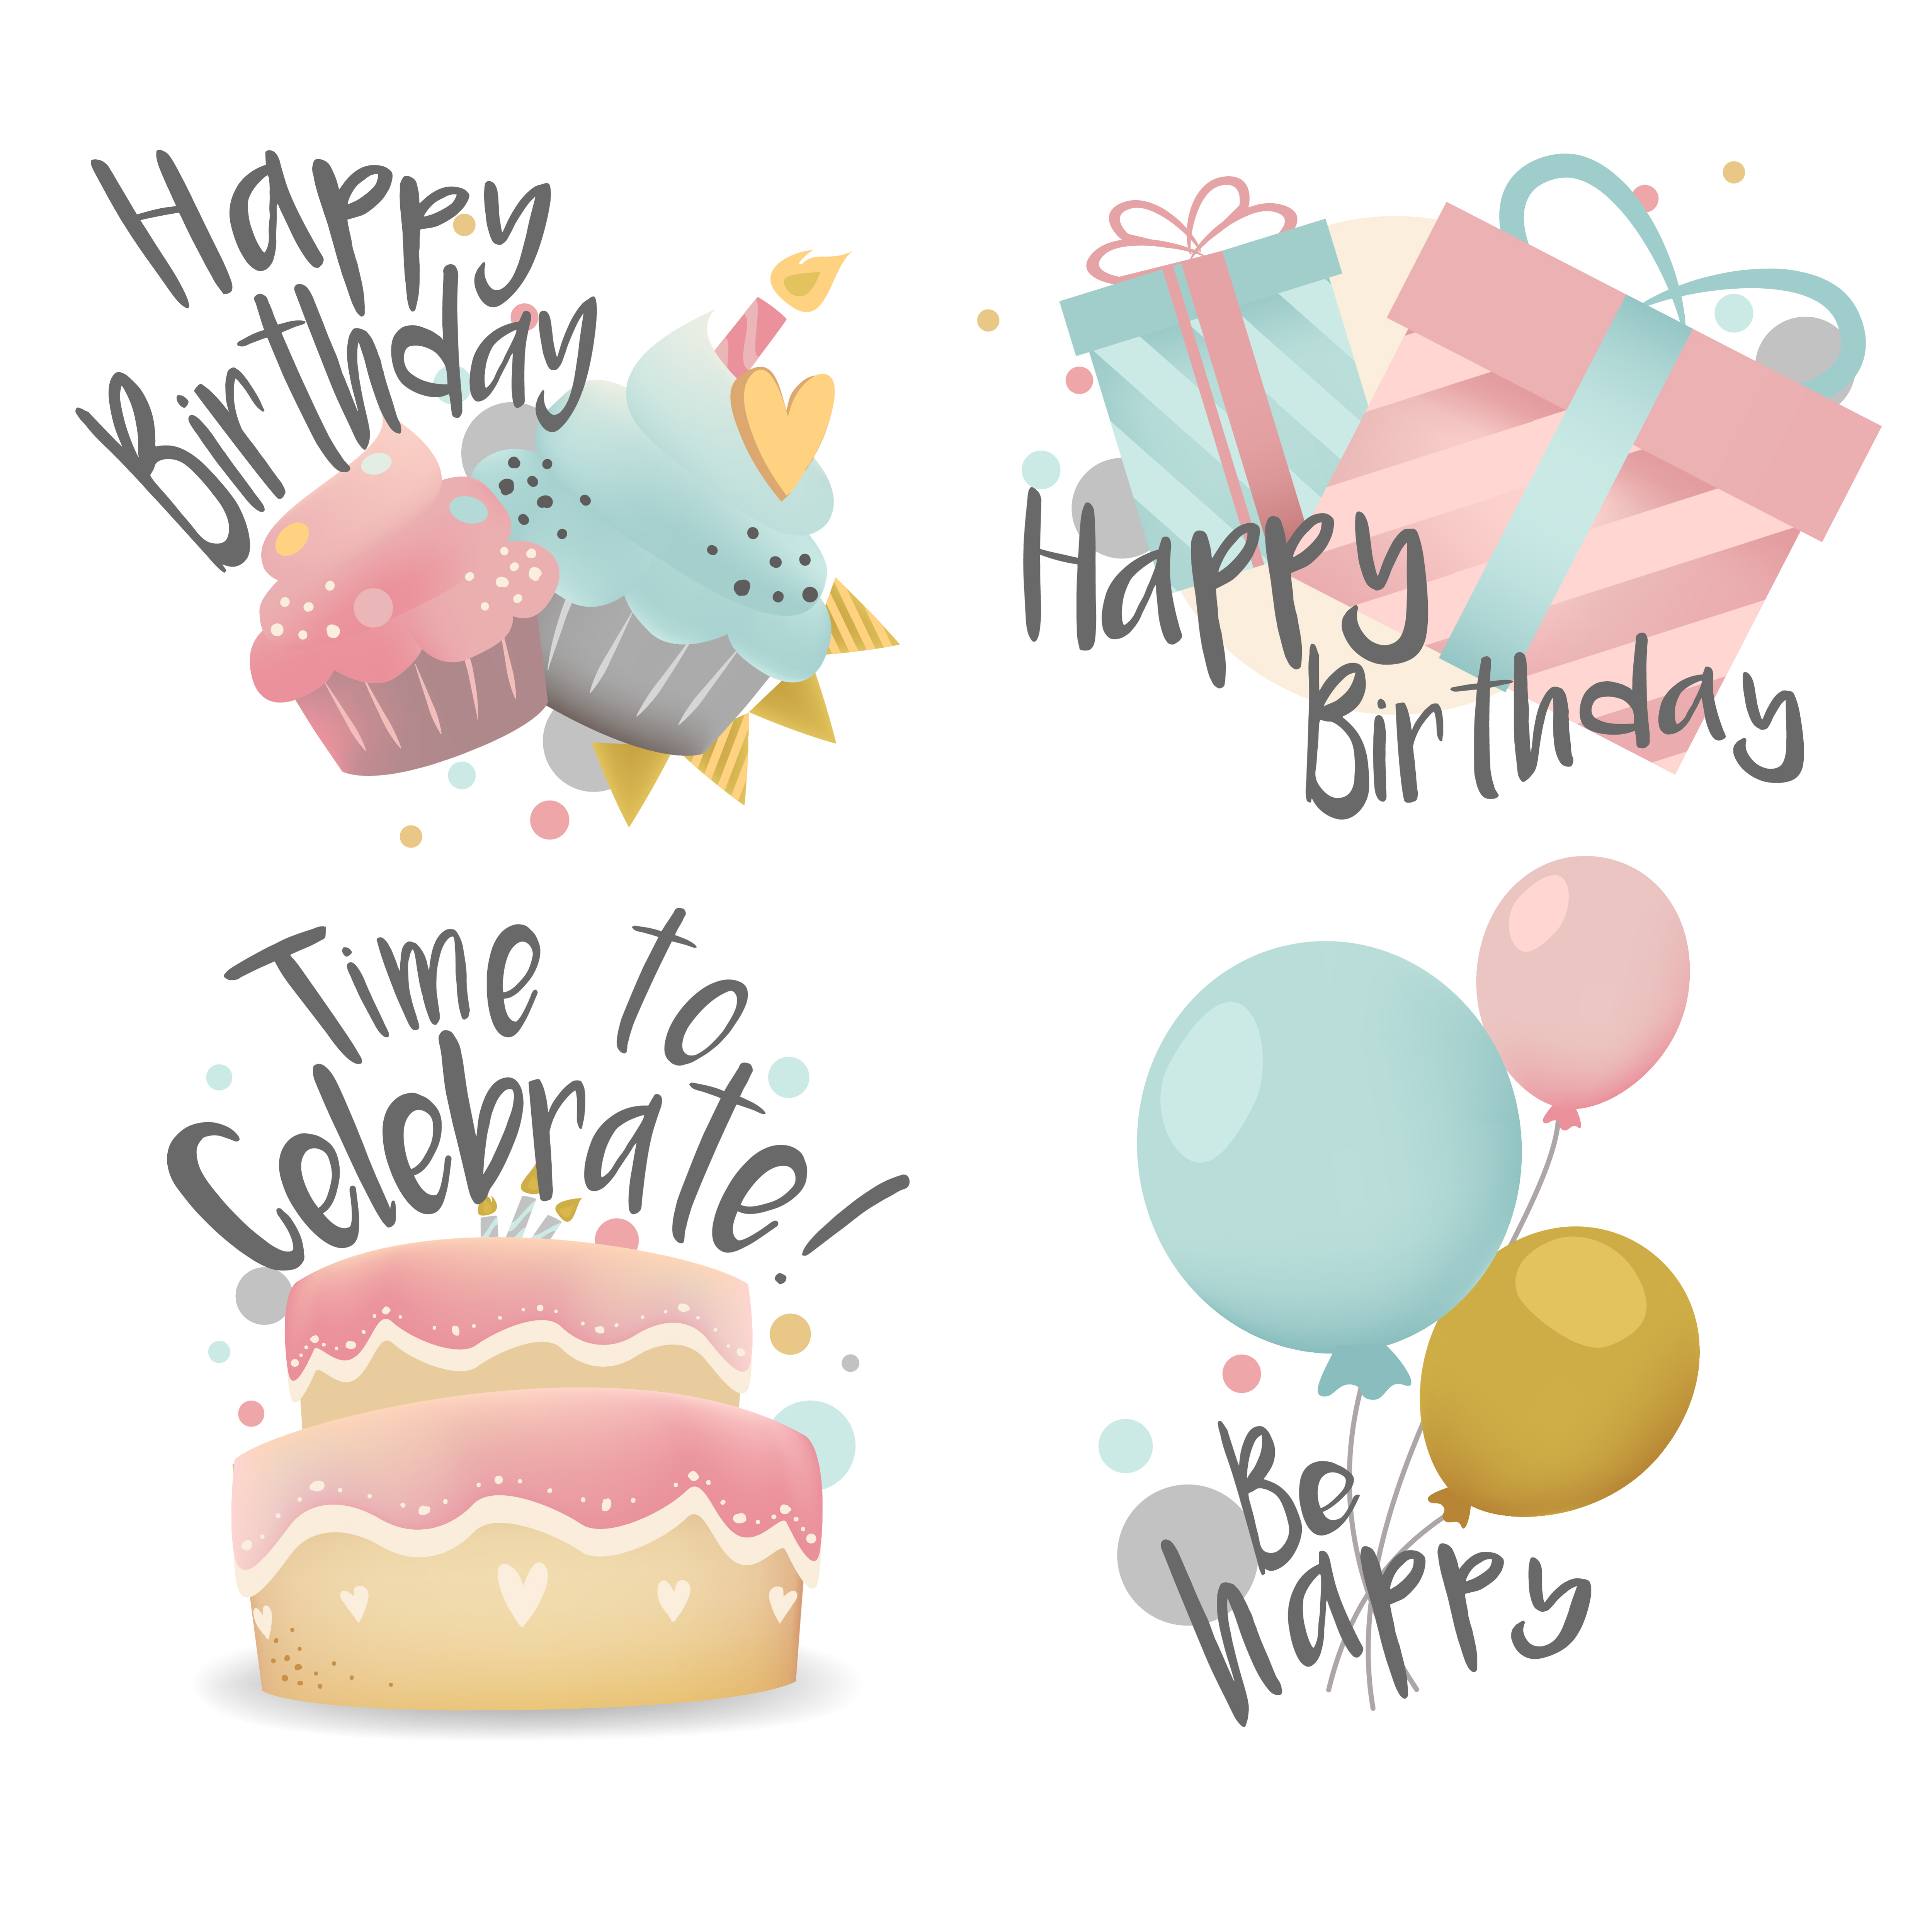 Download Set of birthday wishes design vector - Download Free ...